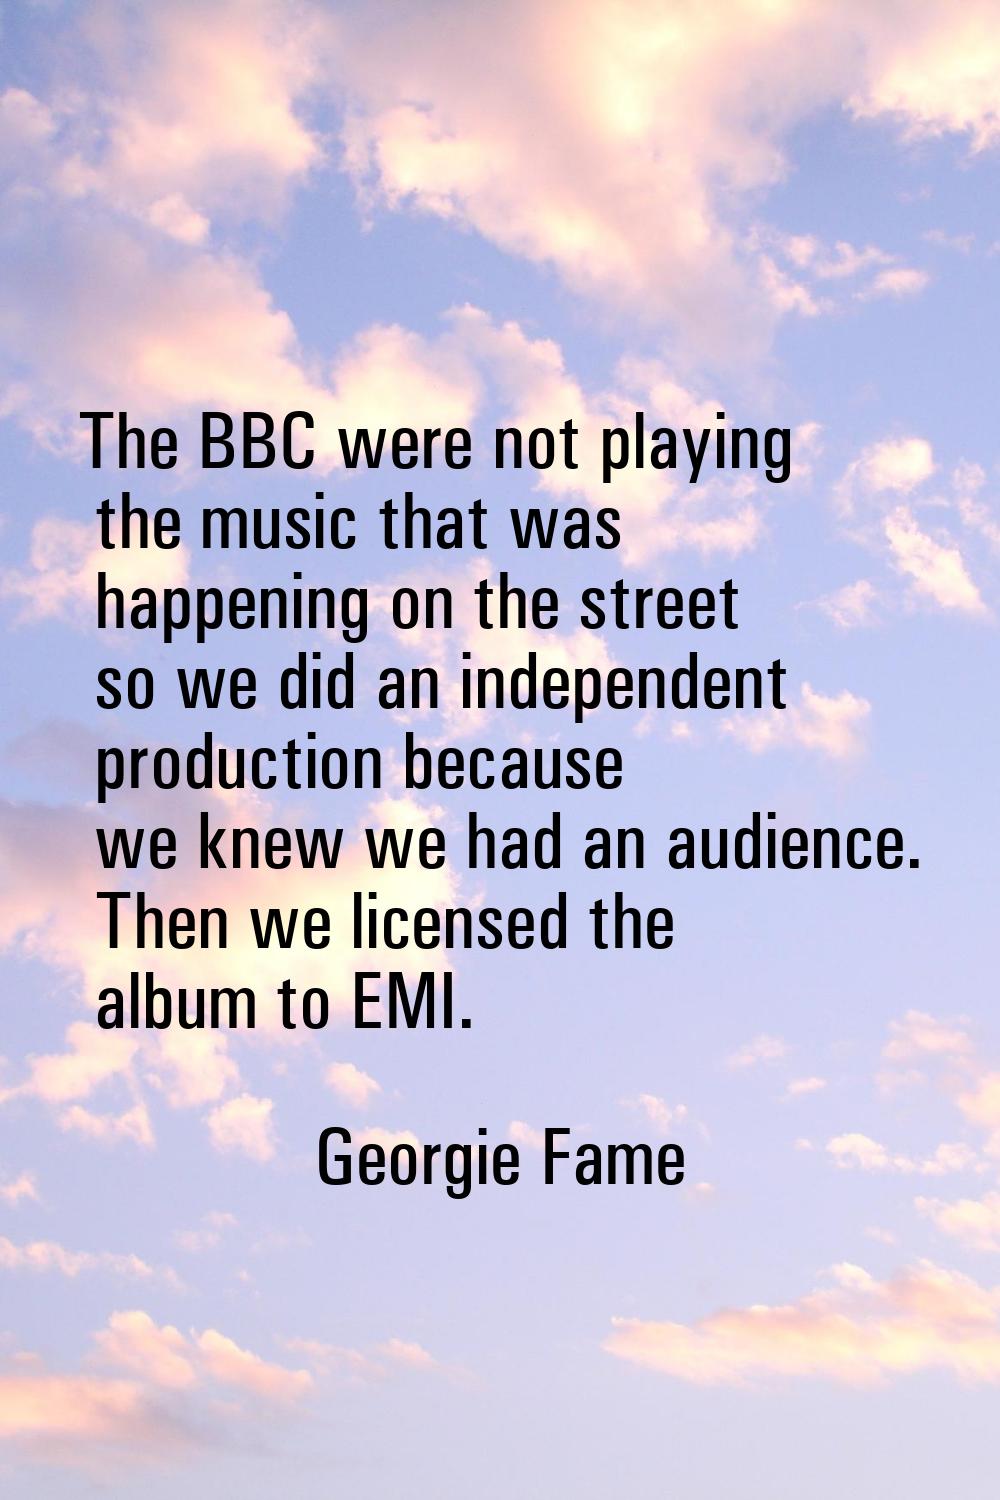 The BBC were not playing the music that was happening on the street so we did an independent produc